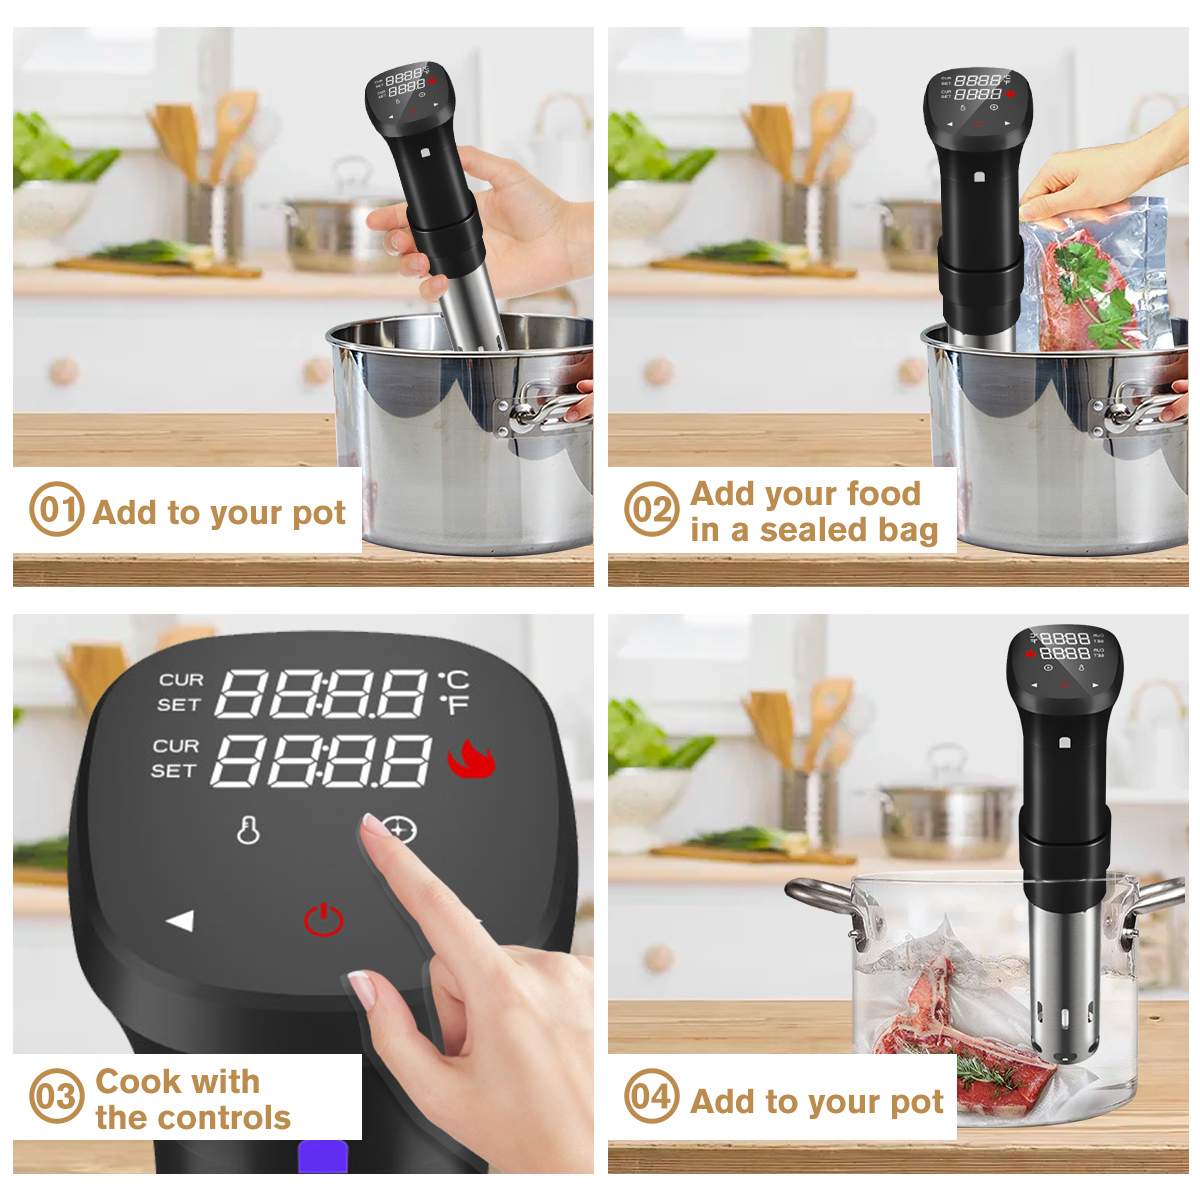 https://cntronic.com/data/product-desc/original/ila-2255800964142952-augienb-ipx7-waterproof-1800w-lcd-touch-sous-vide-cooker-cooking-machine-sturdy-immersion-circulator-accurate-slow-cooker7.jpg